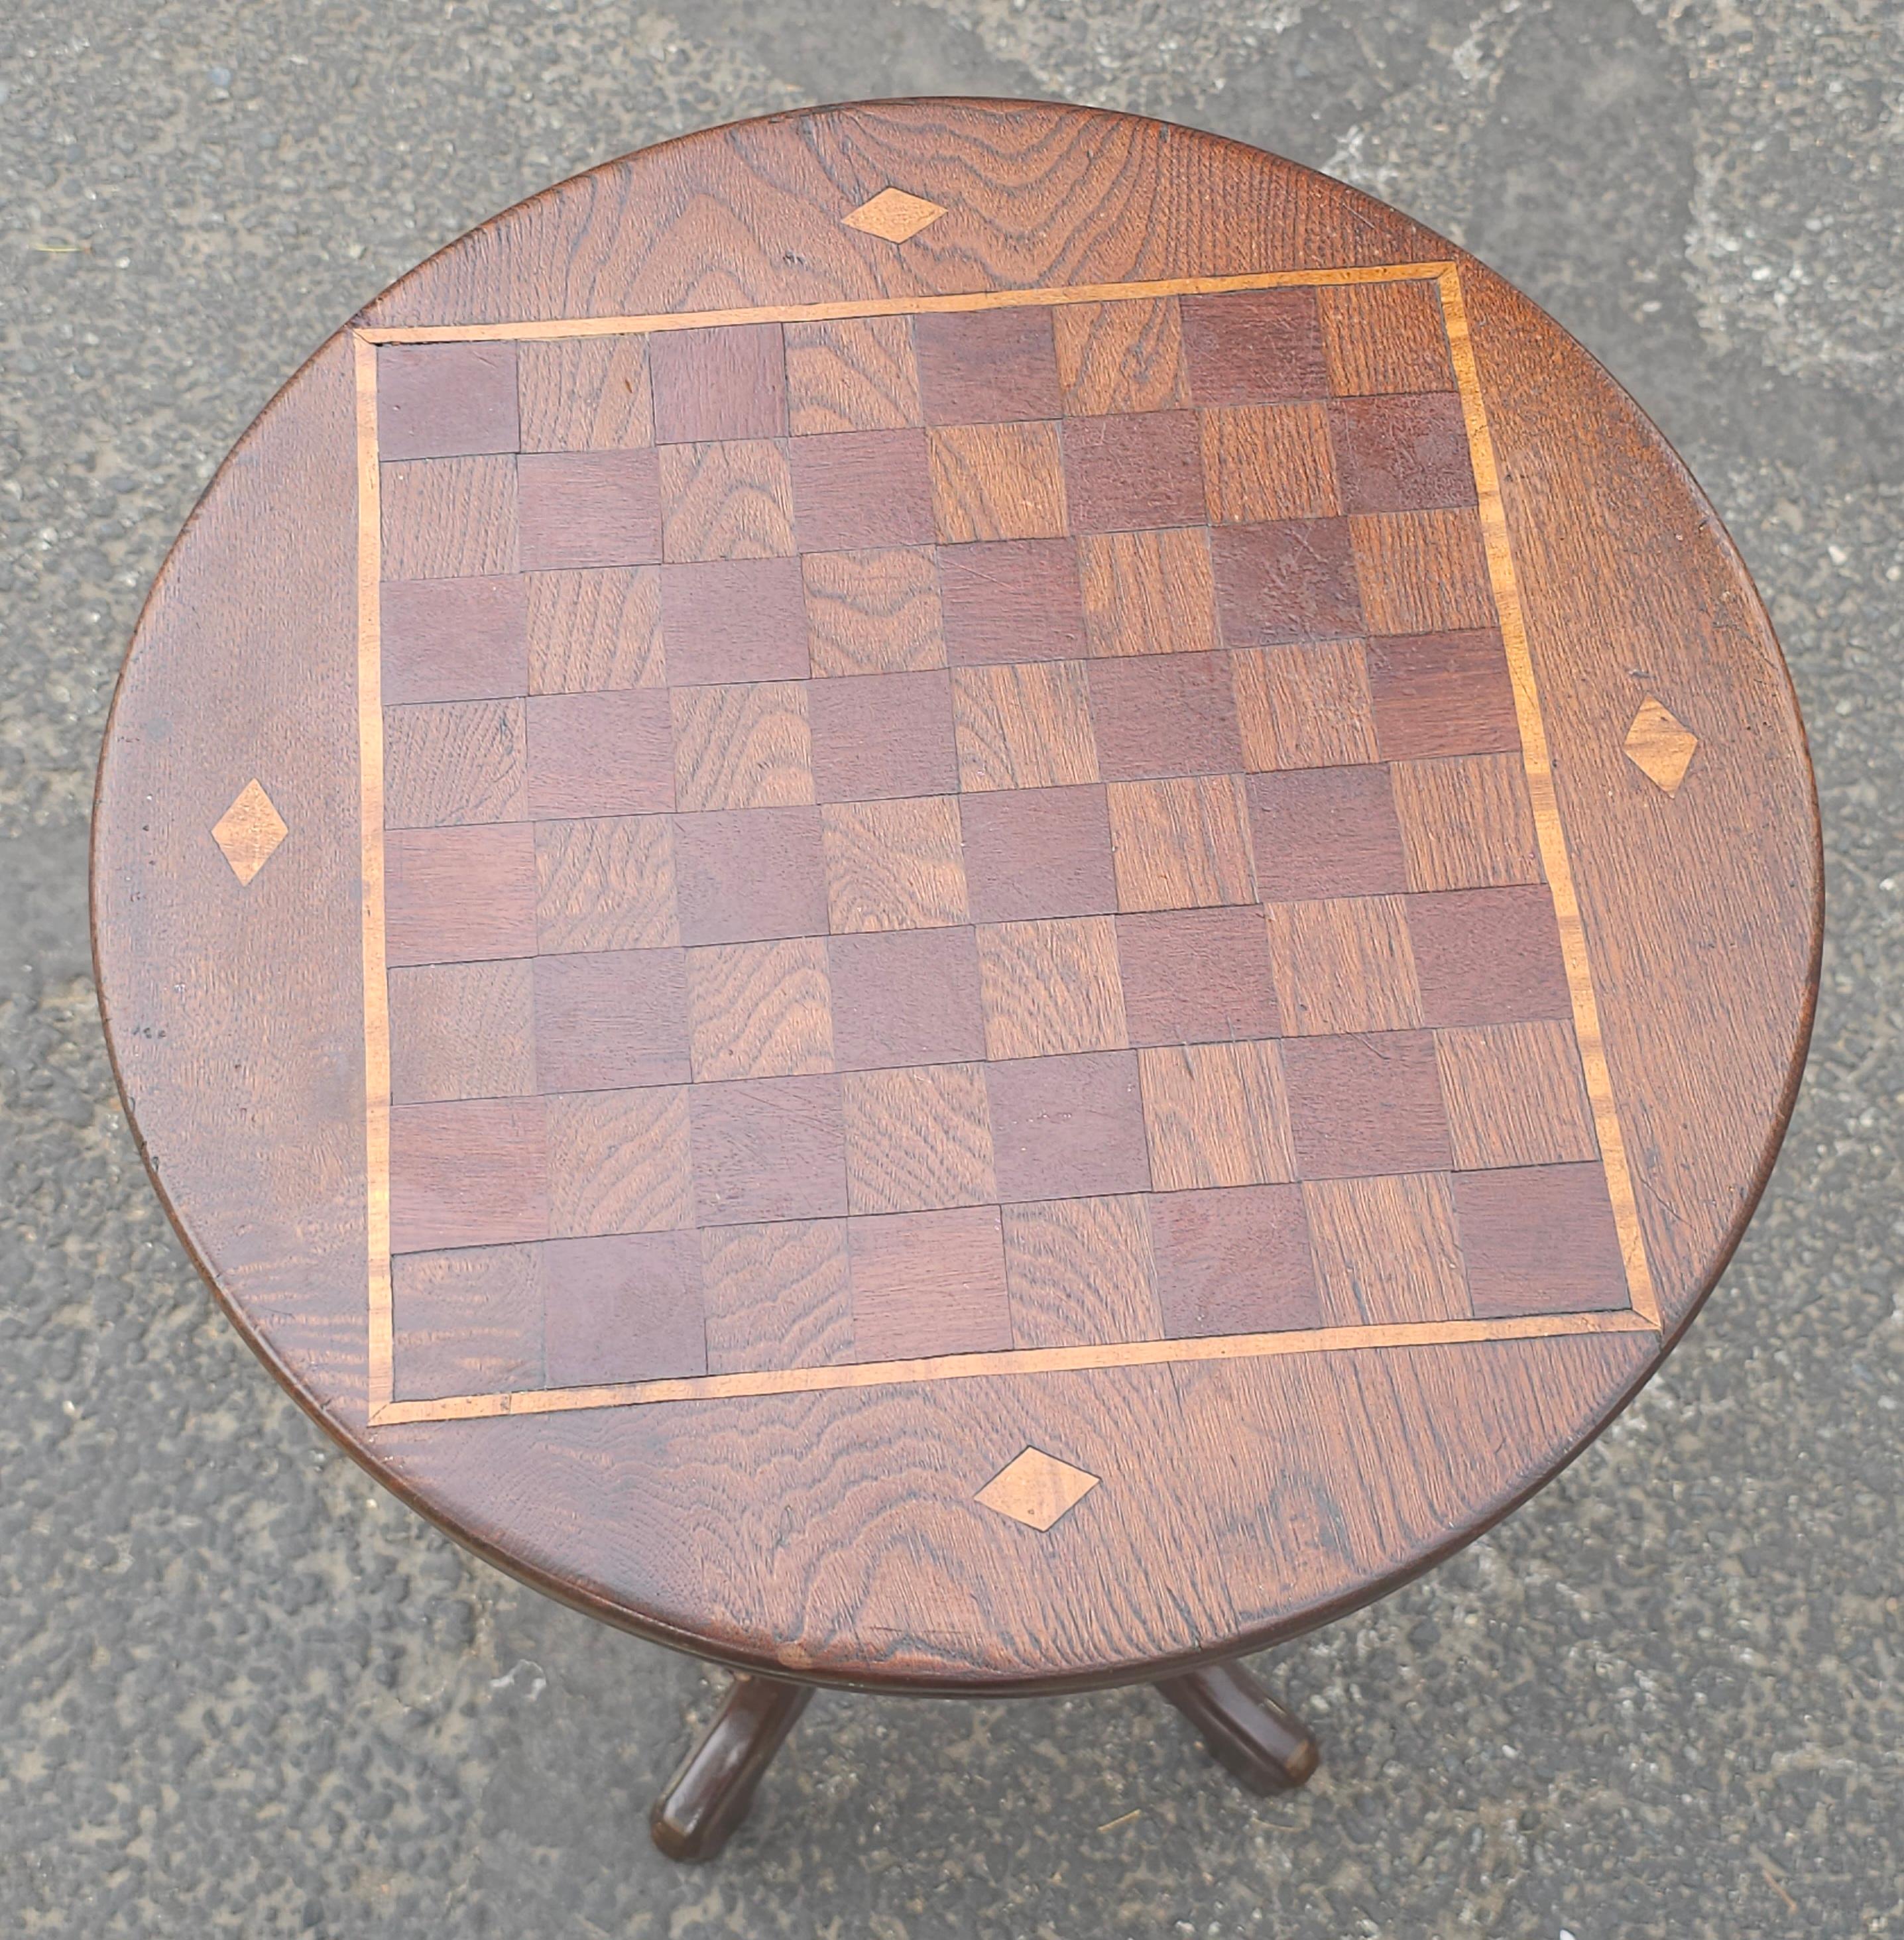 19th Century Victorian Oak & Mixed Wood Parquetry and Inlay Pedestal Game Table In Good Condition For Sale In Germantown, MD